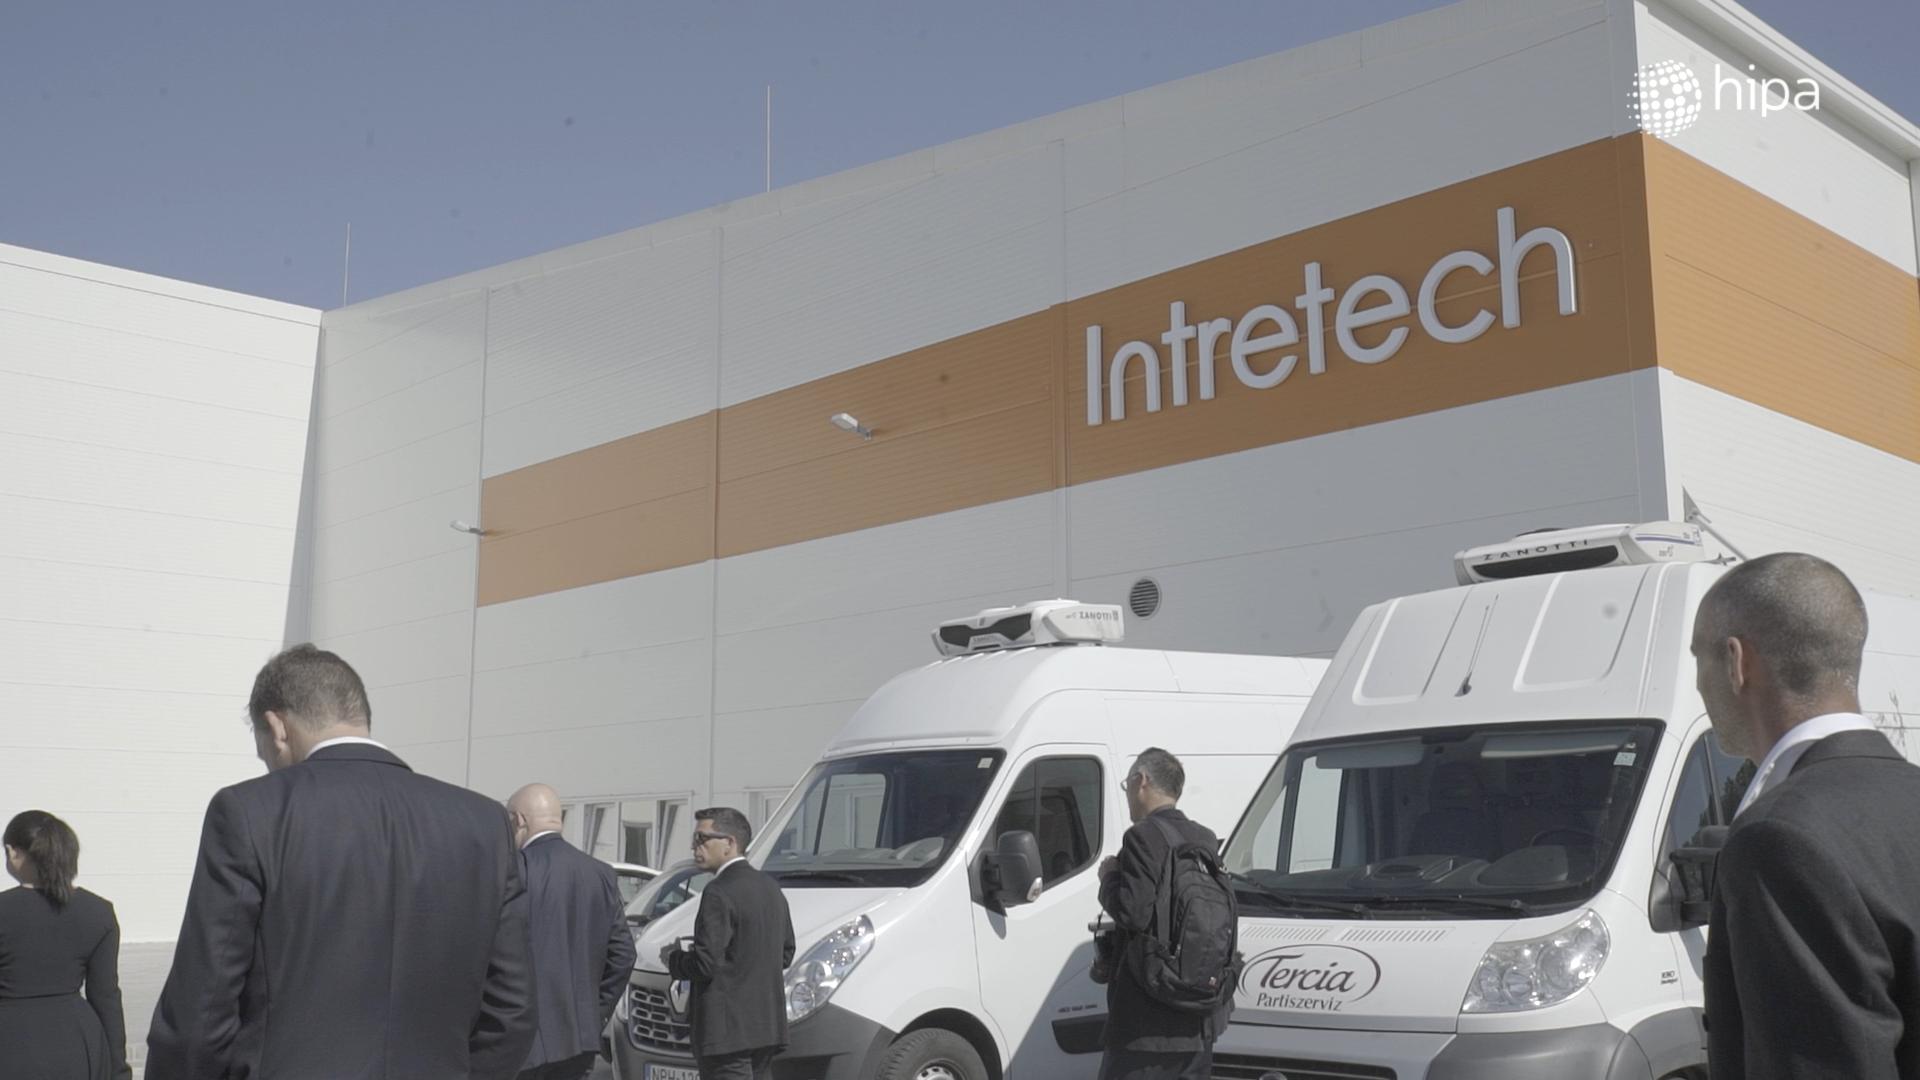 Works have finished on the first Hungarian unit of Intretech in Kapuvár